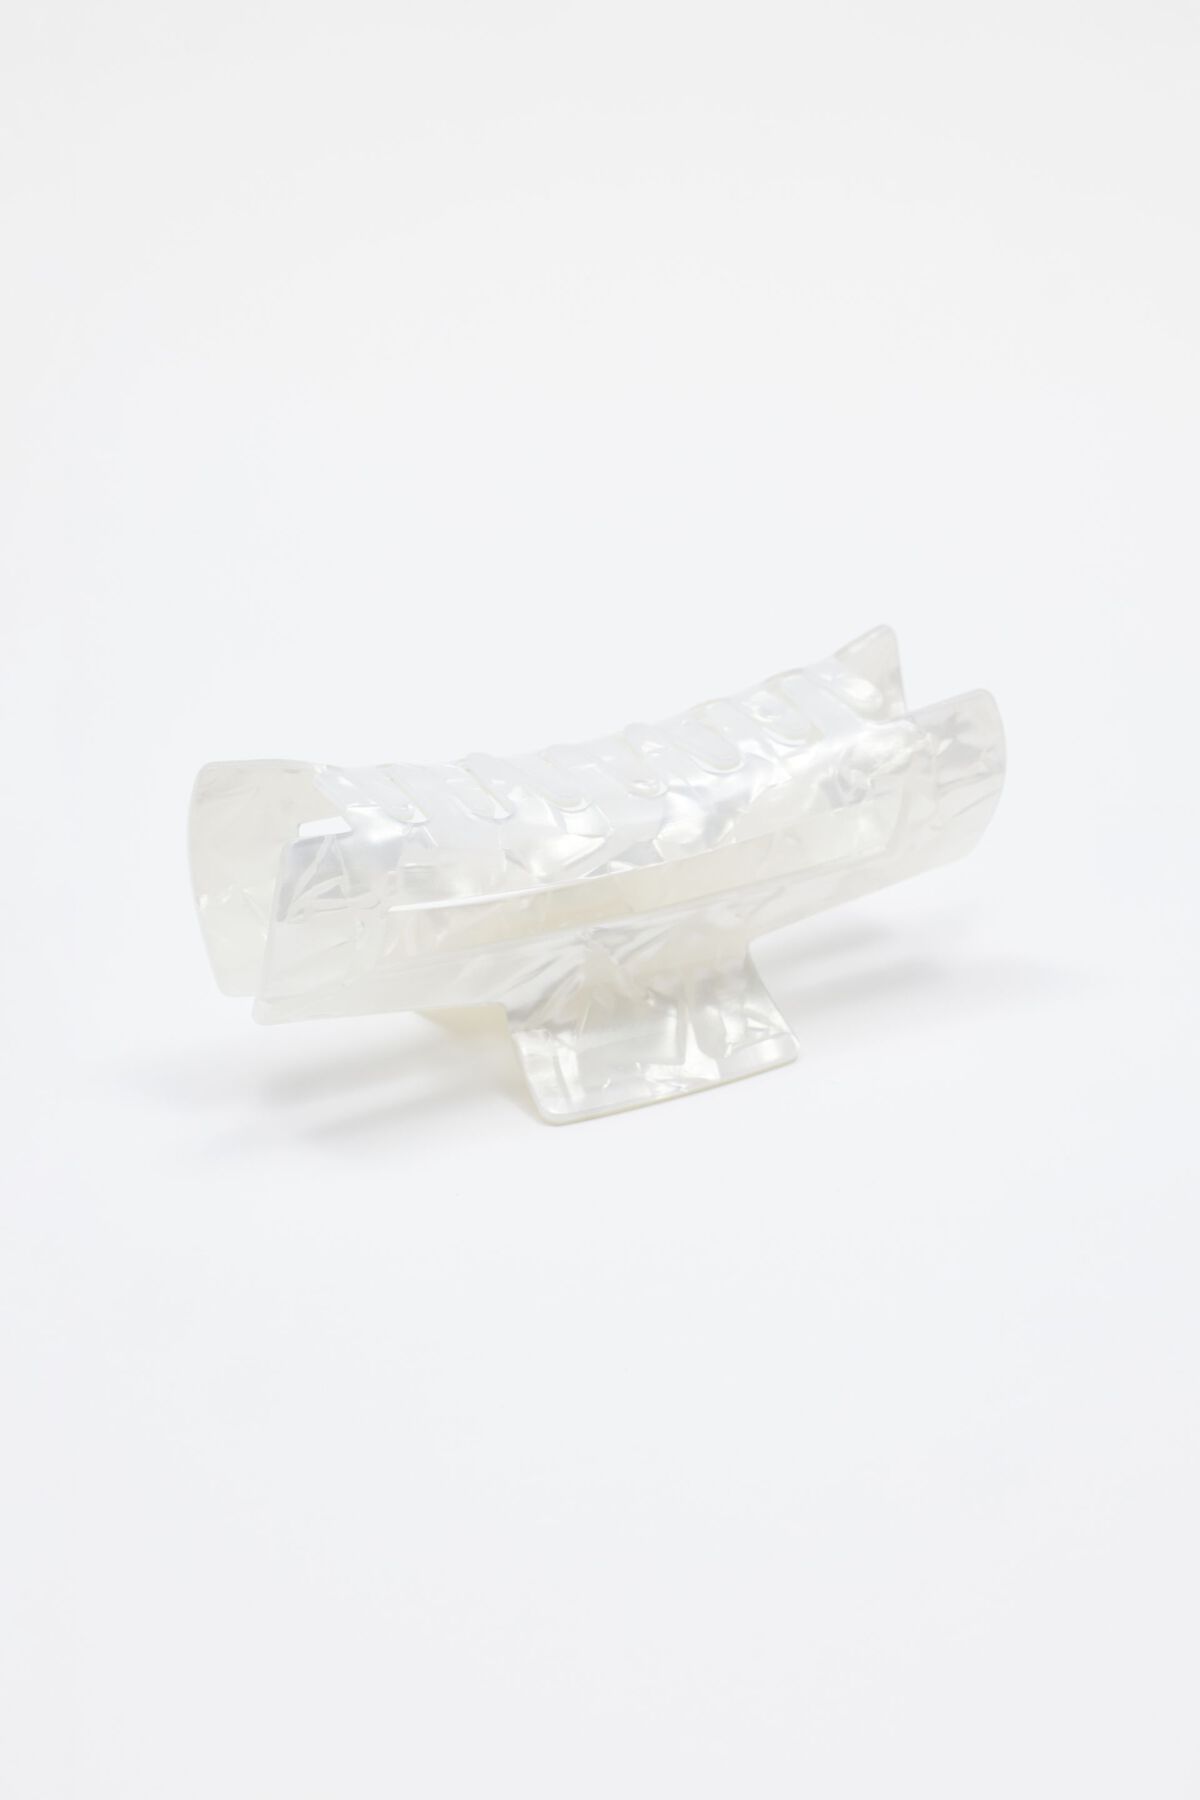 Dynamite Super Sized Rectangle Claw Hair Clip. 3